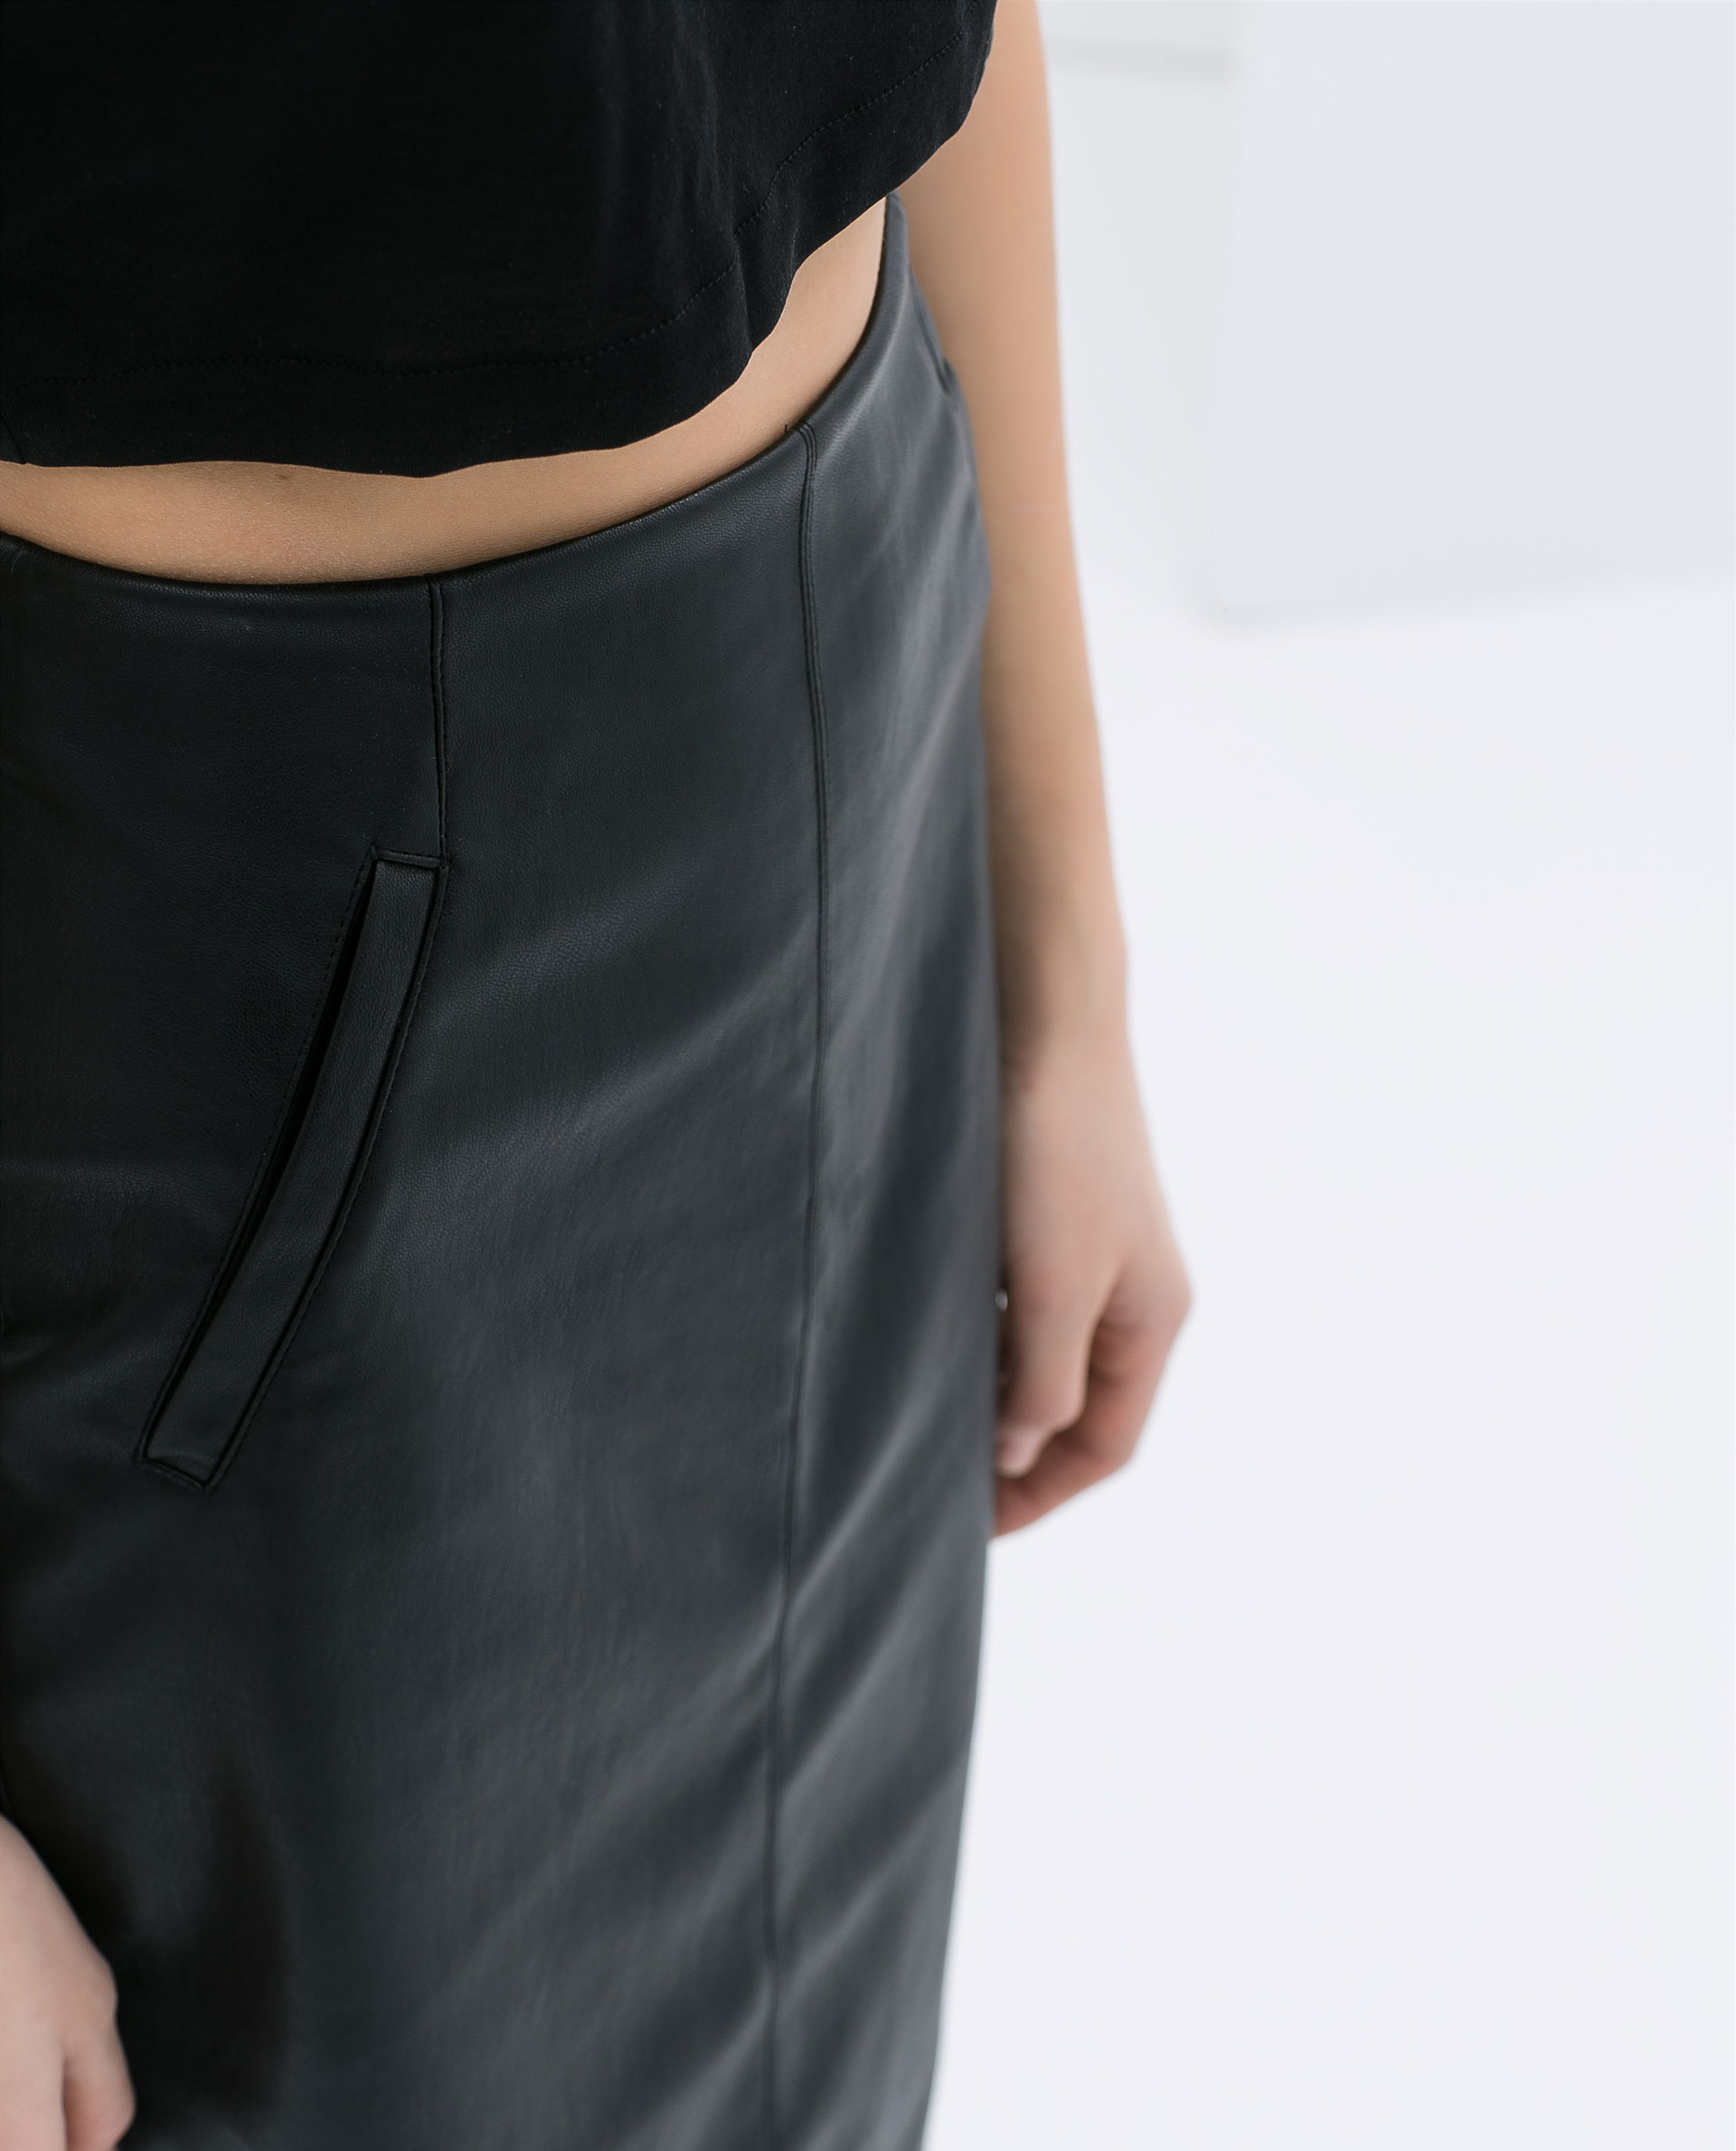 Zara Faux Leather Pencil Skirt with Pockets in Black | Lyst